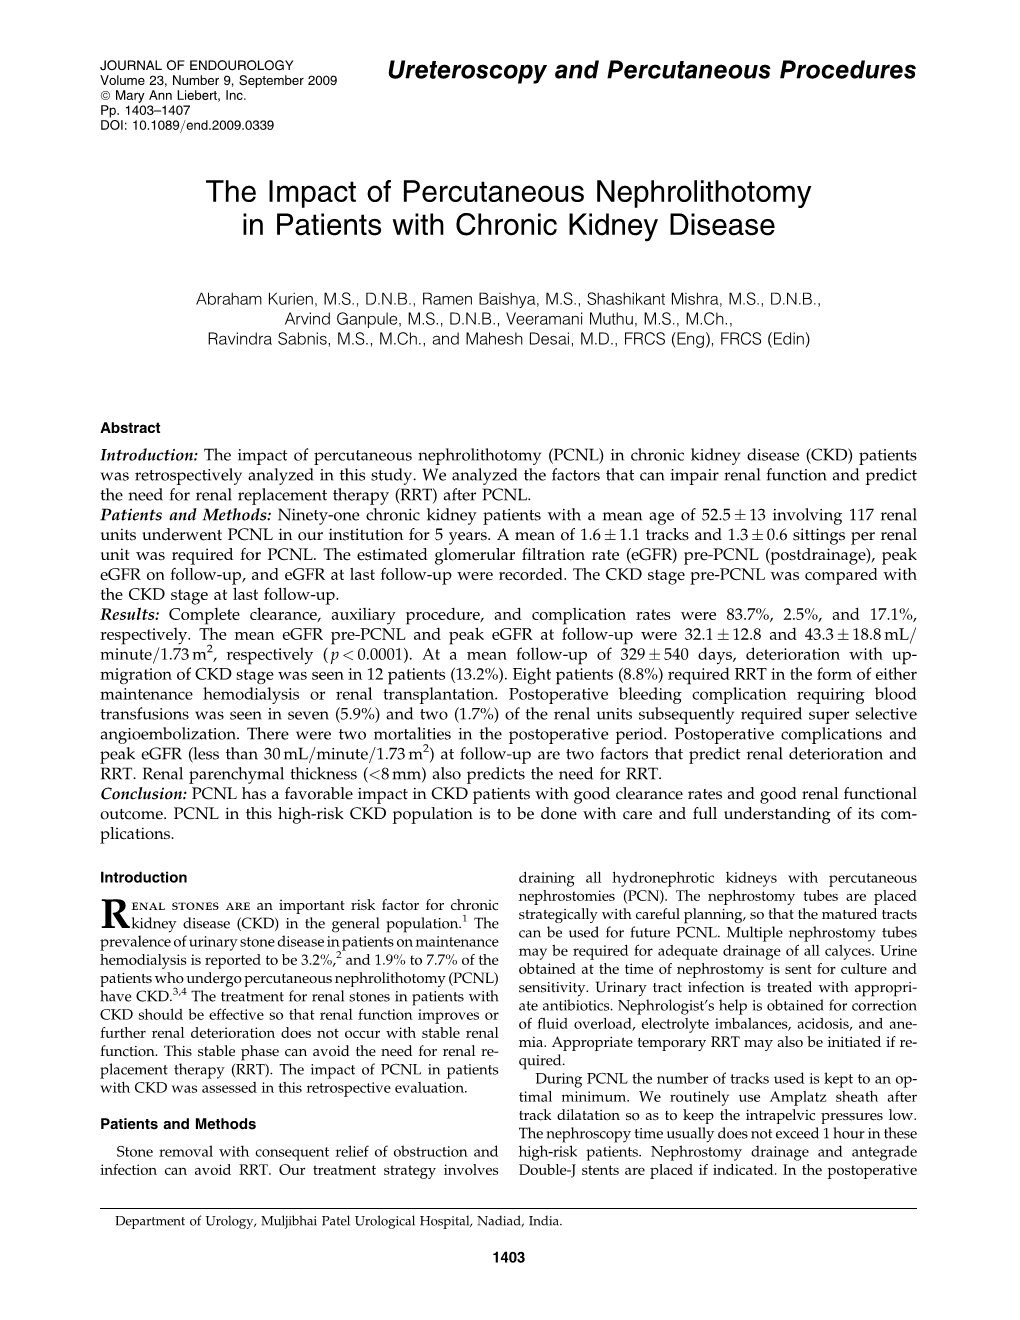 The Impact of Percutaneous Nephrolithotomy in Patients with Chronic Kidney Disease